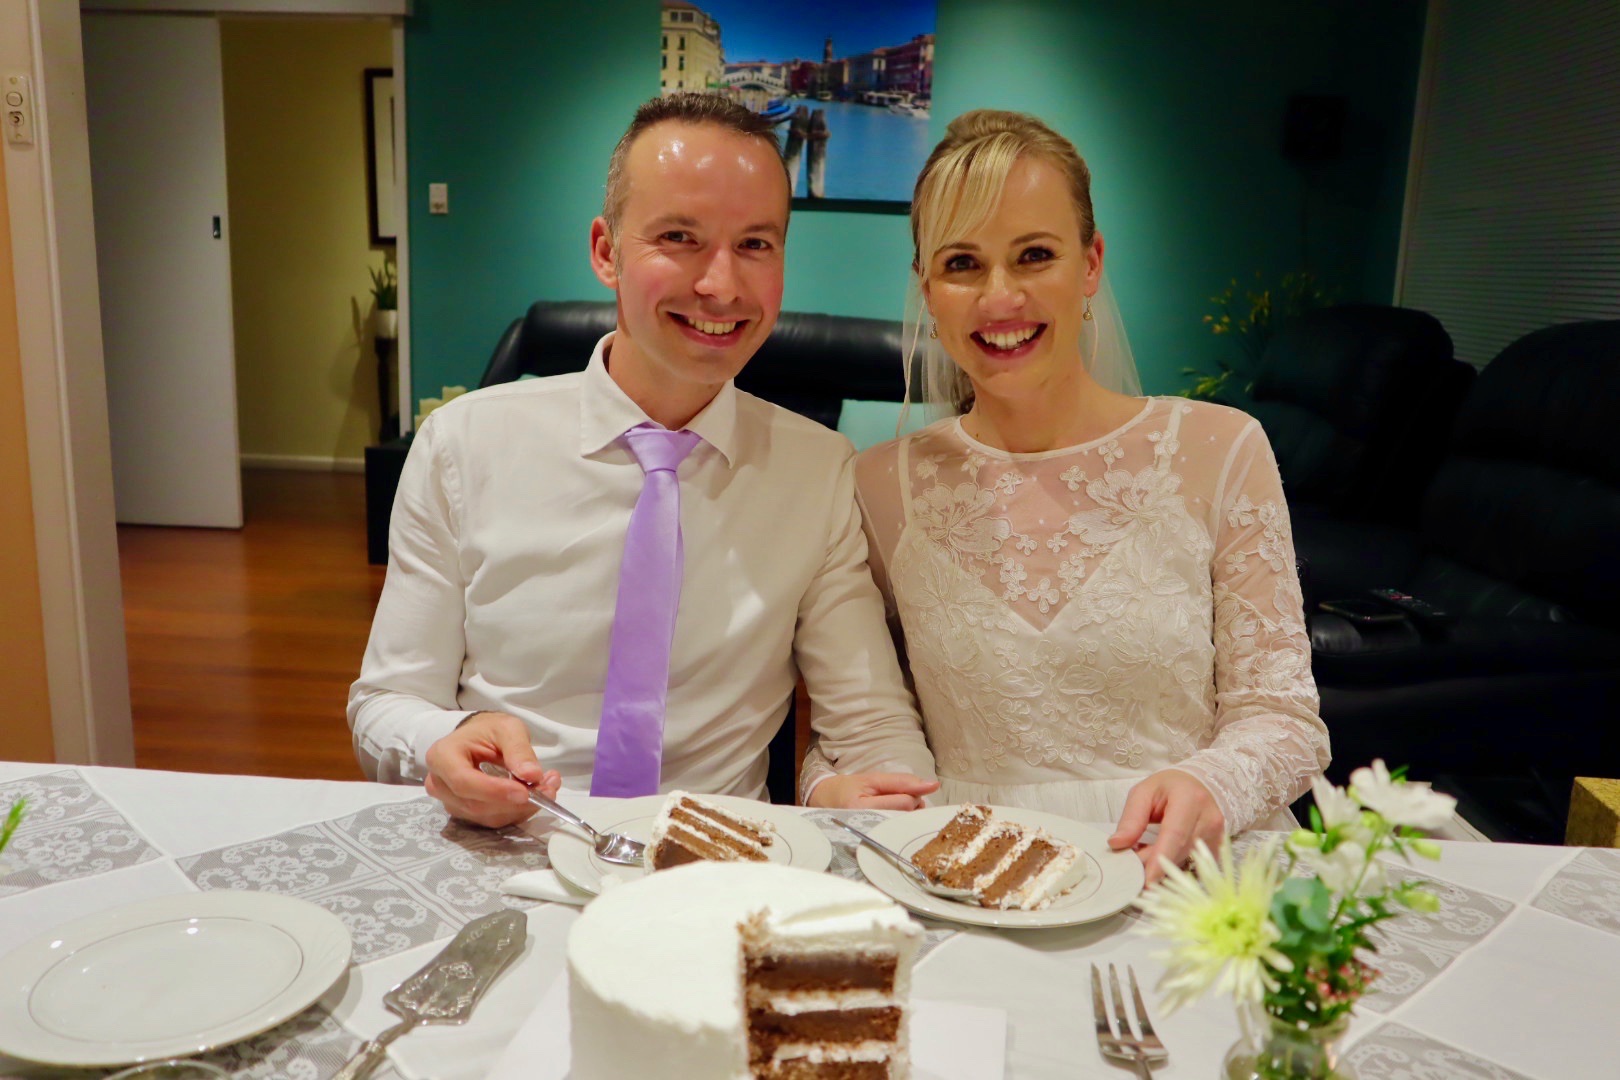 Happy couple say ‘I do’ amid pandemic restrictions